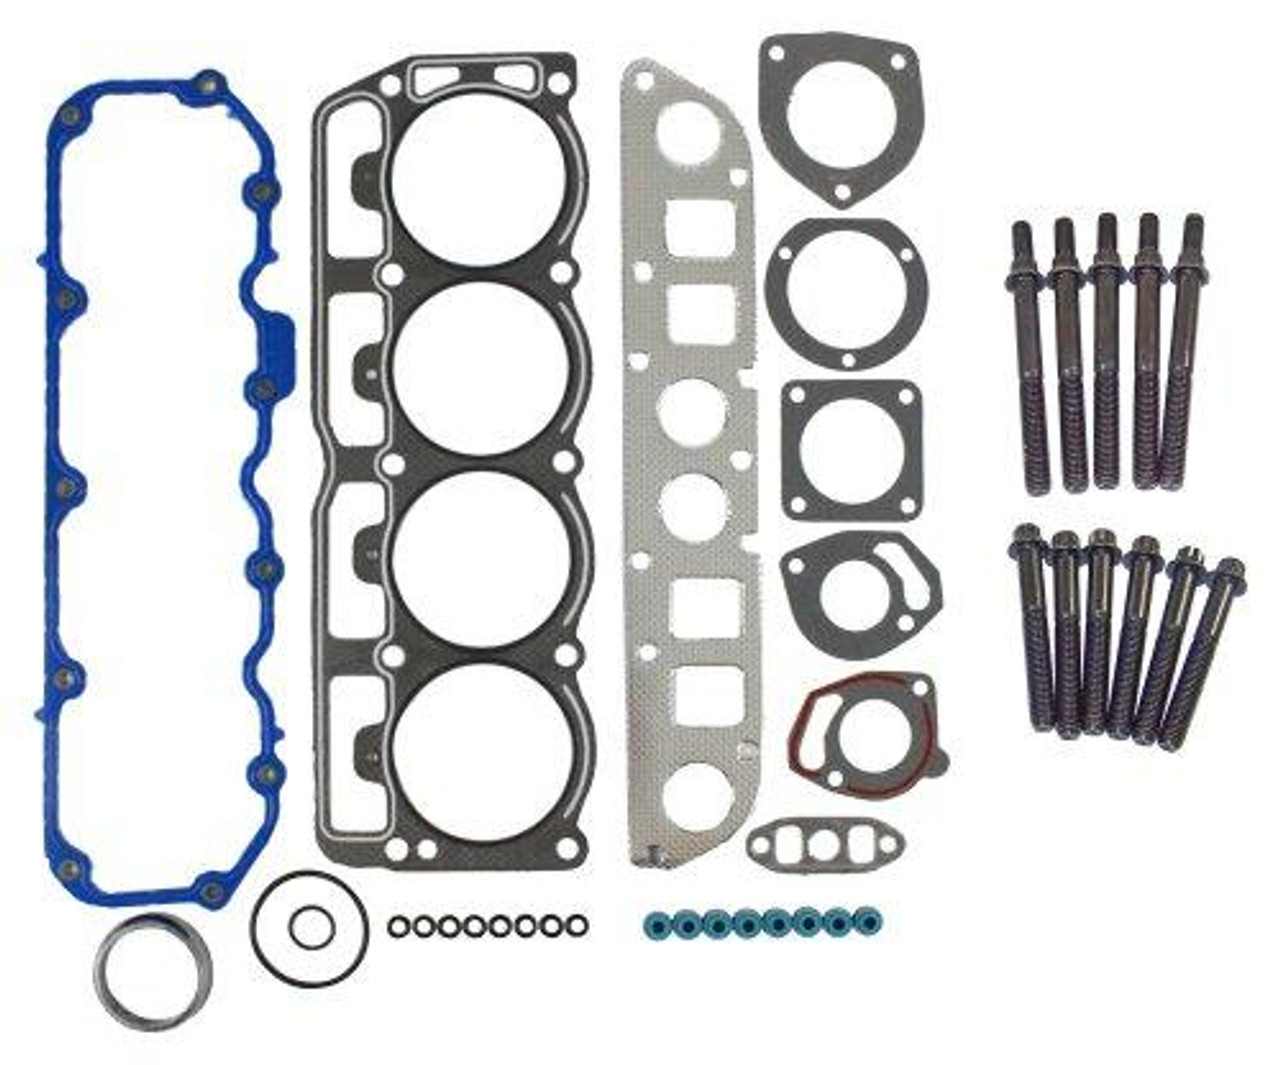 Head Gasket Set with Head Bolt Kit - 1999 Jeep Cherokee 2.5L Engine Parts # HGB1122ZE9